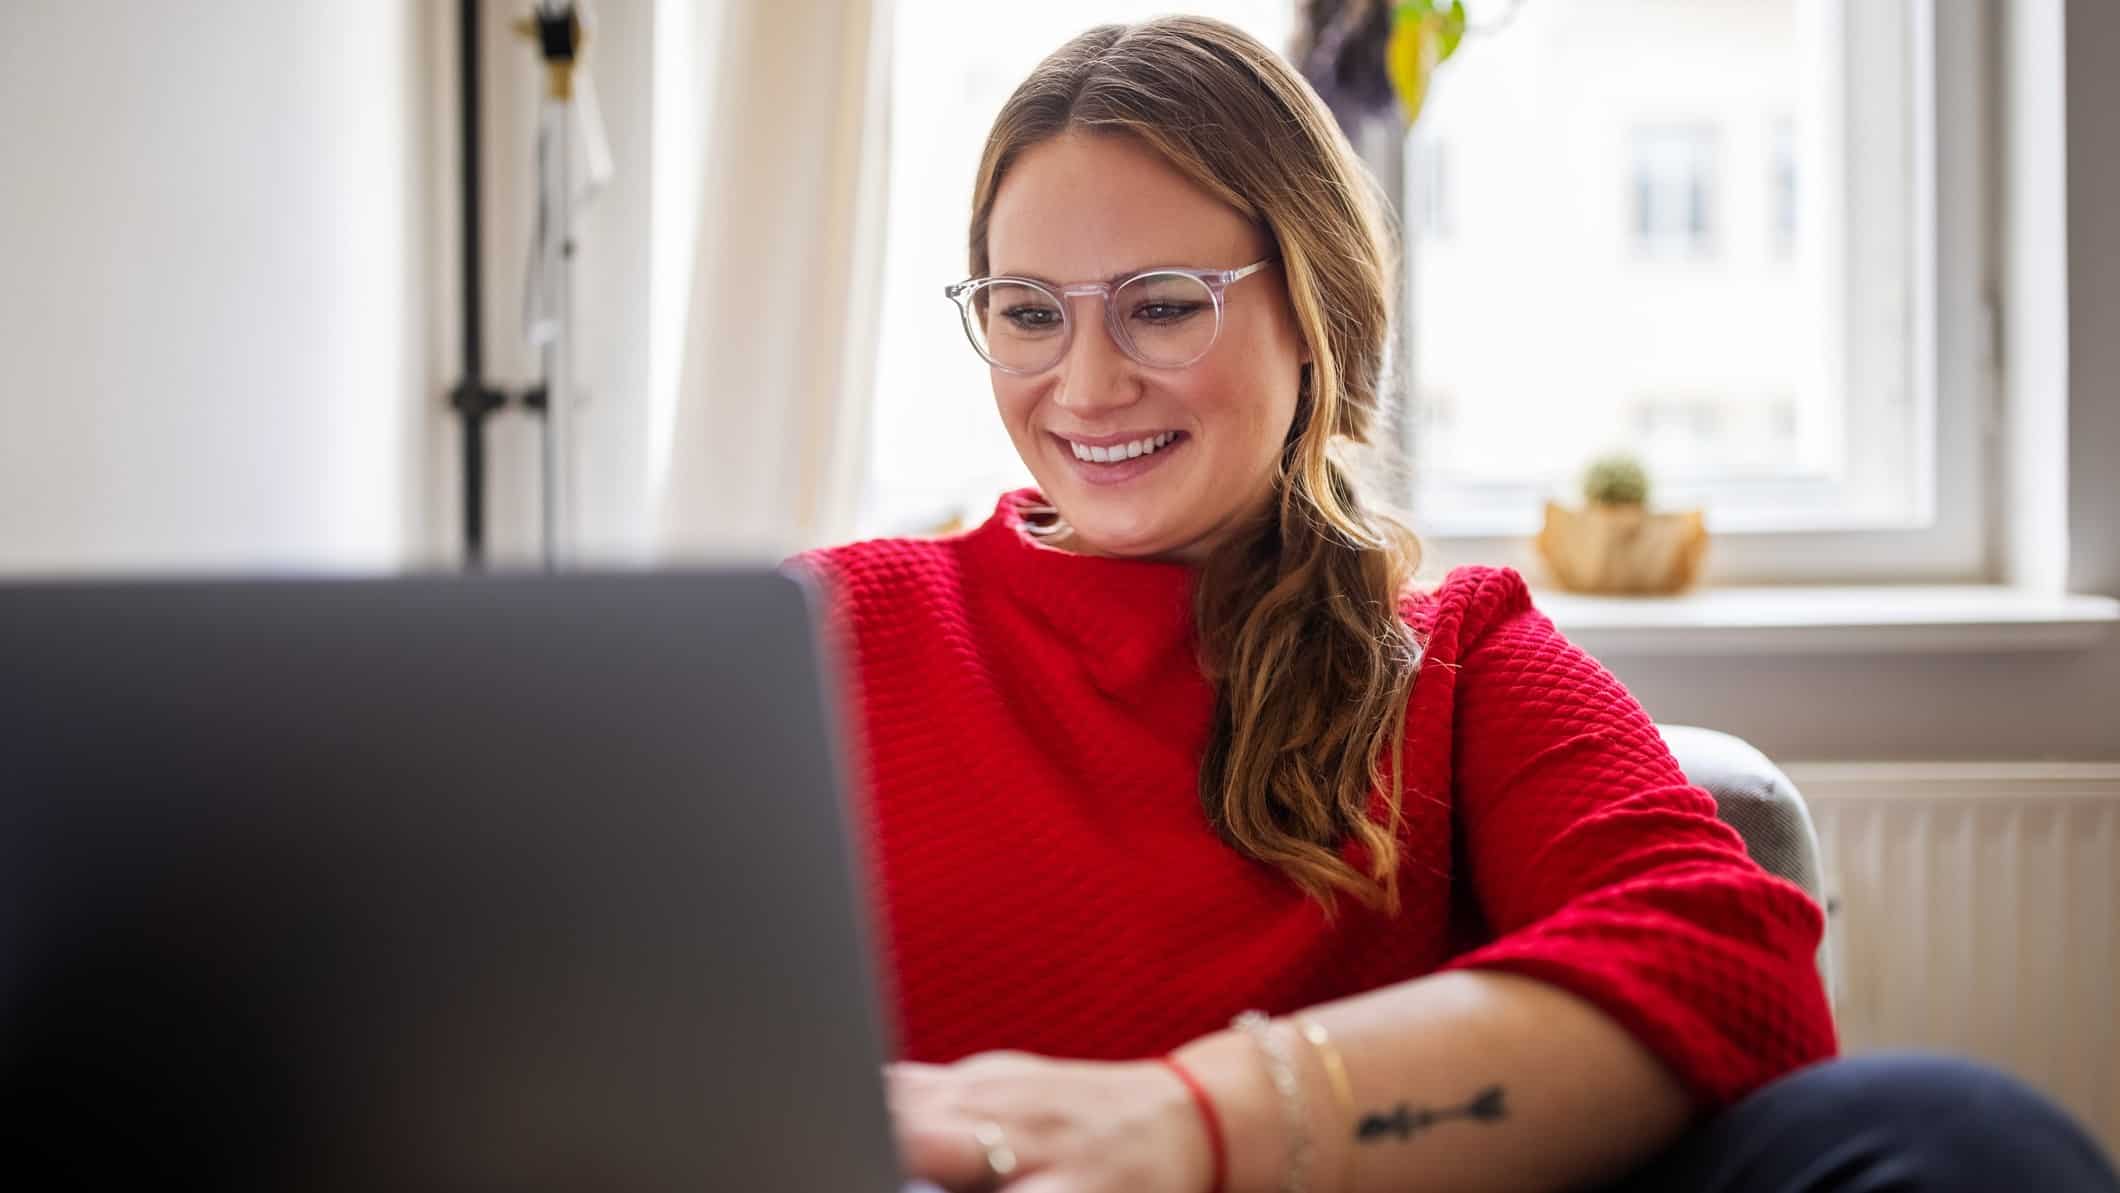 Young woman wearing glasses and red top looks at laptop happily